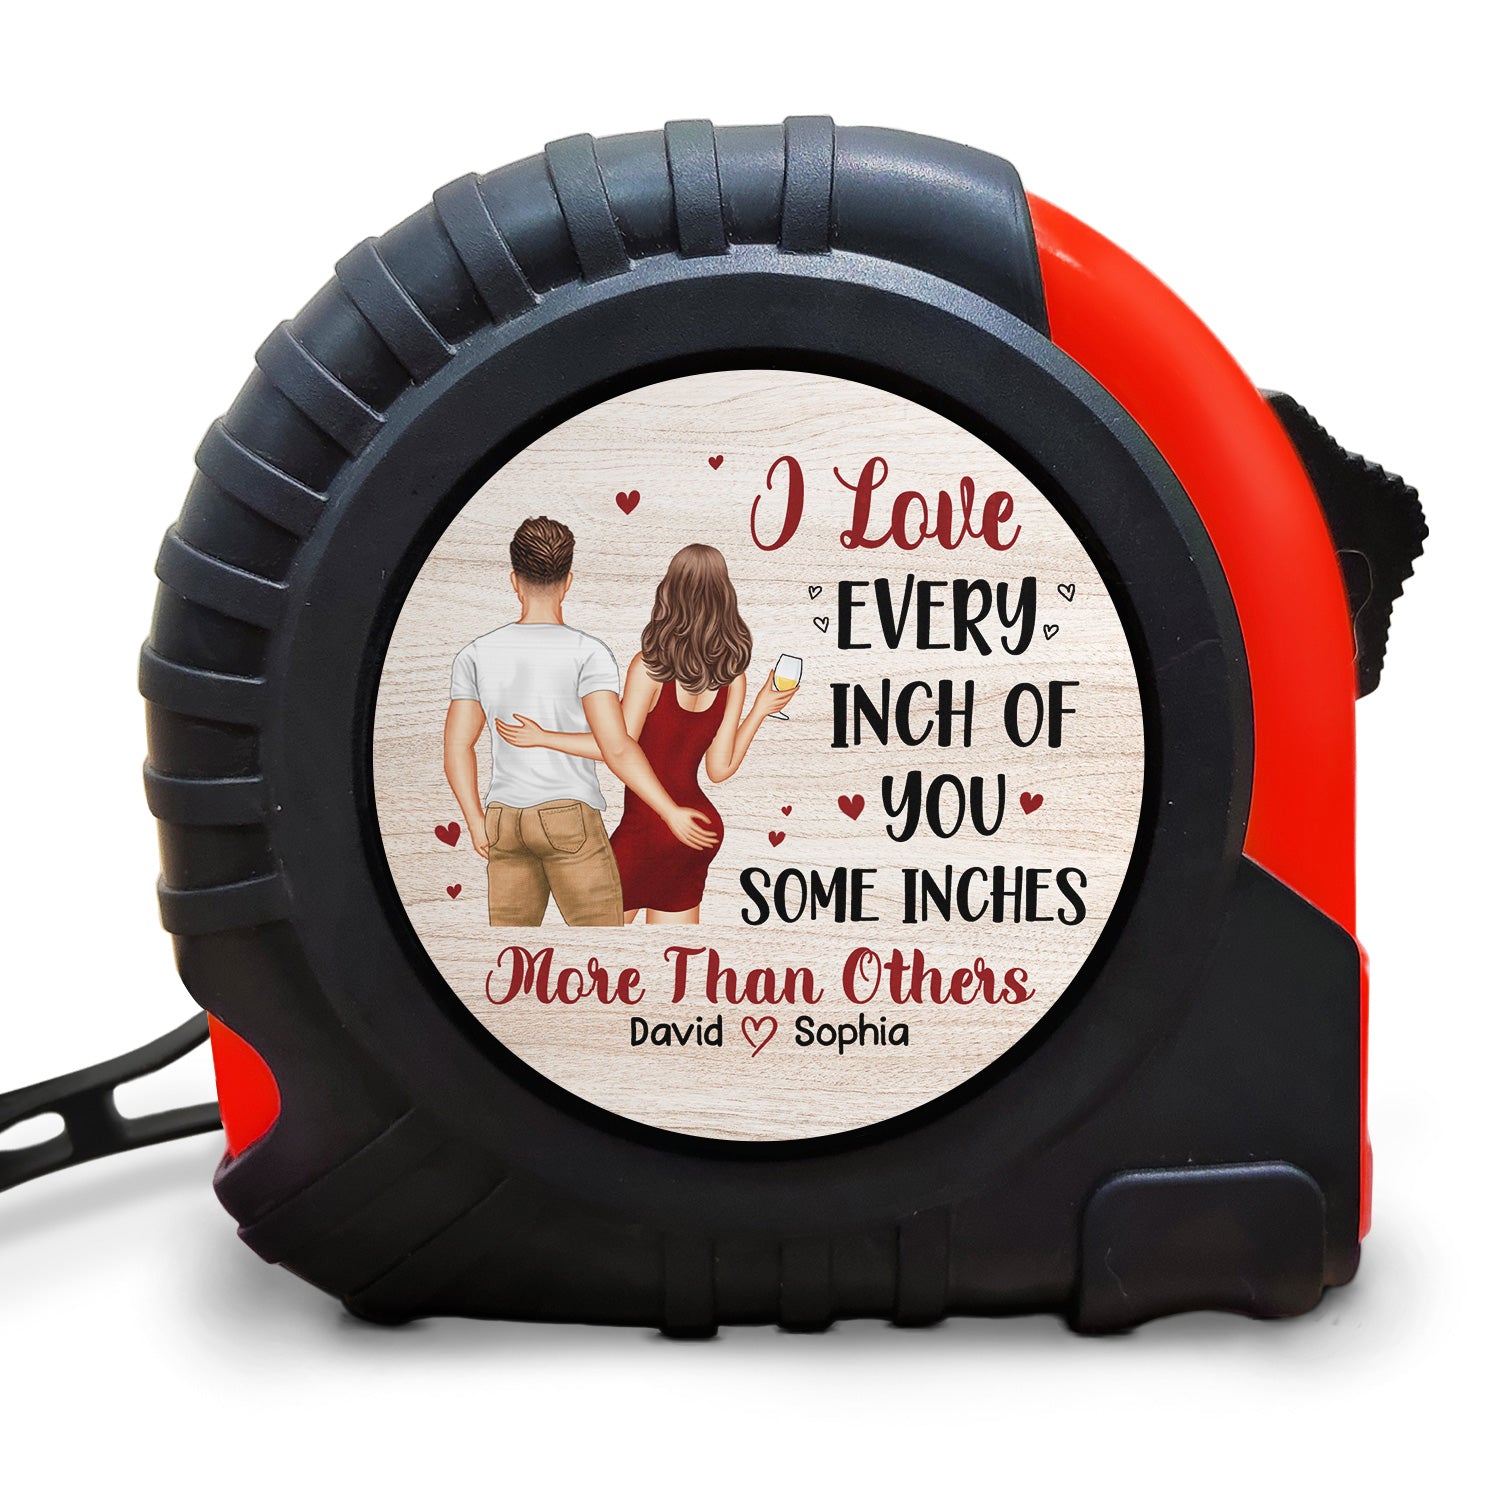 I Love Every Inch Of You - Gift For Couples, Husband, Boyfriend - Personalized Tape Measure